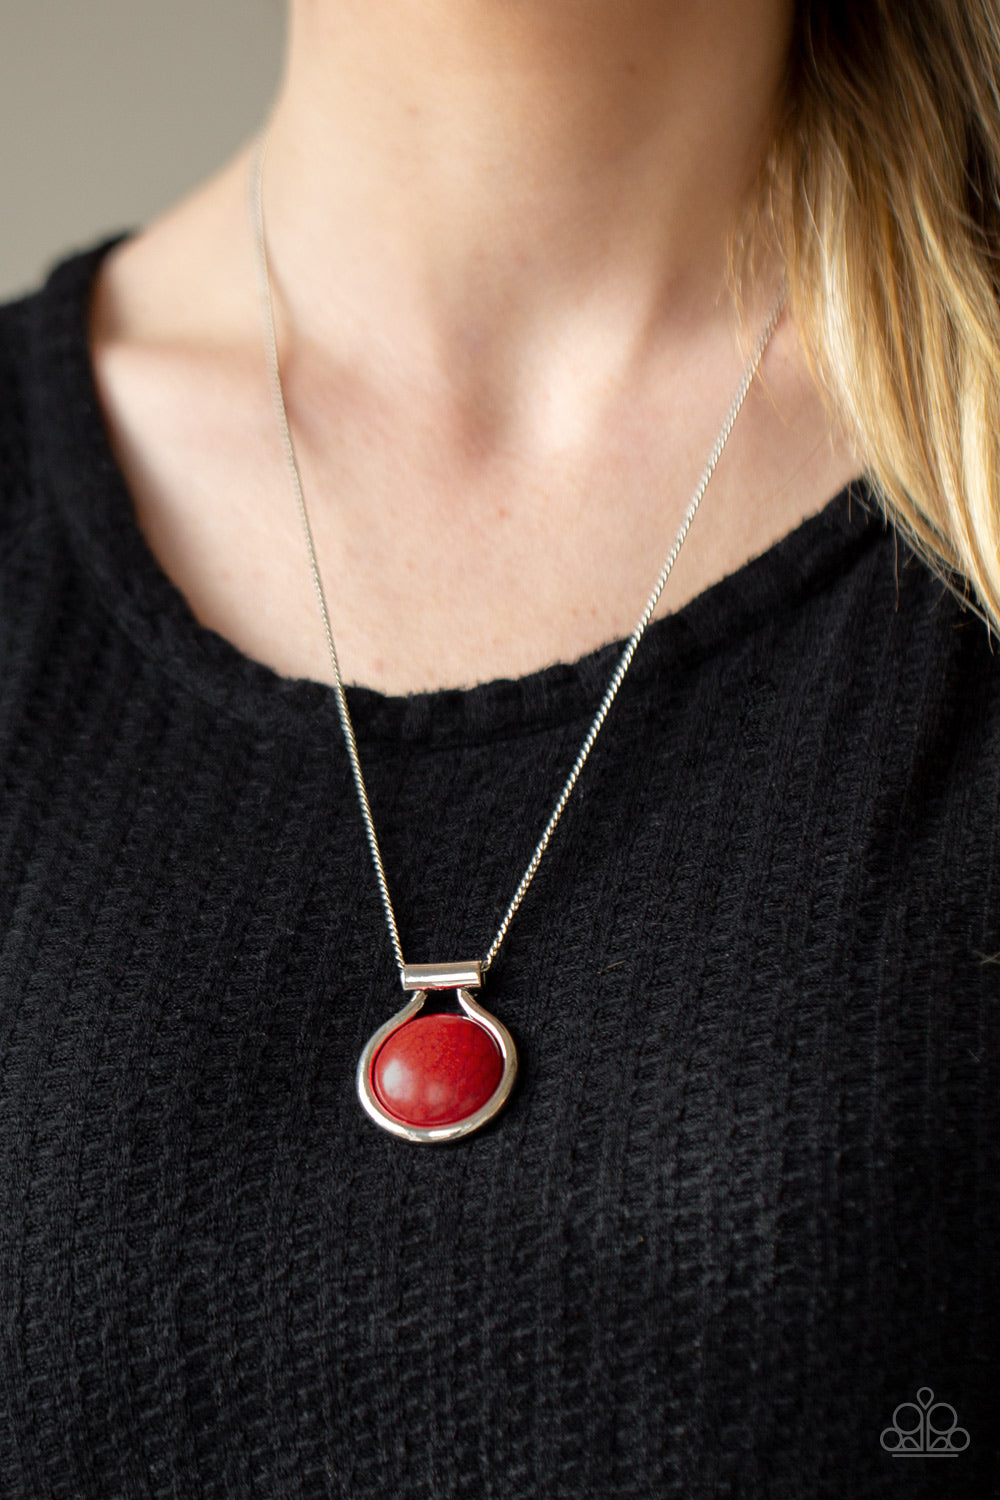 Patagonian Paradise - Red Stone Pendant Necklace - Paparazzi Accessories